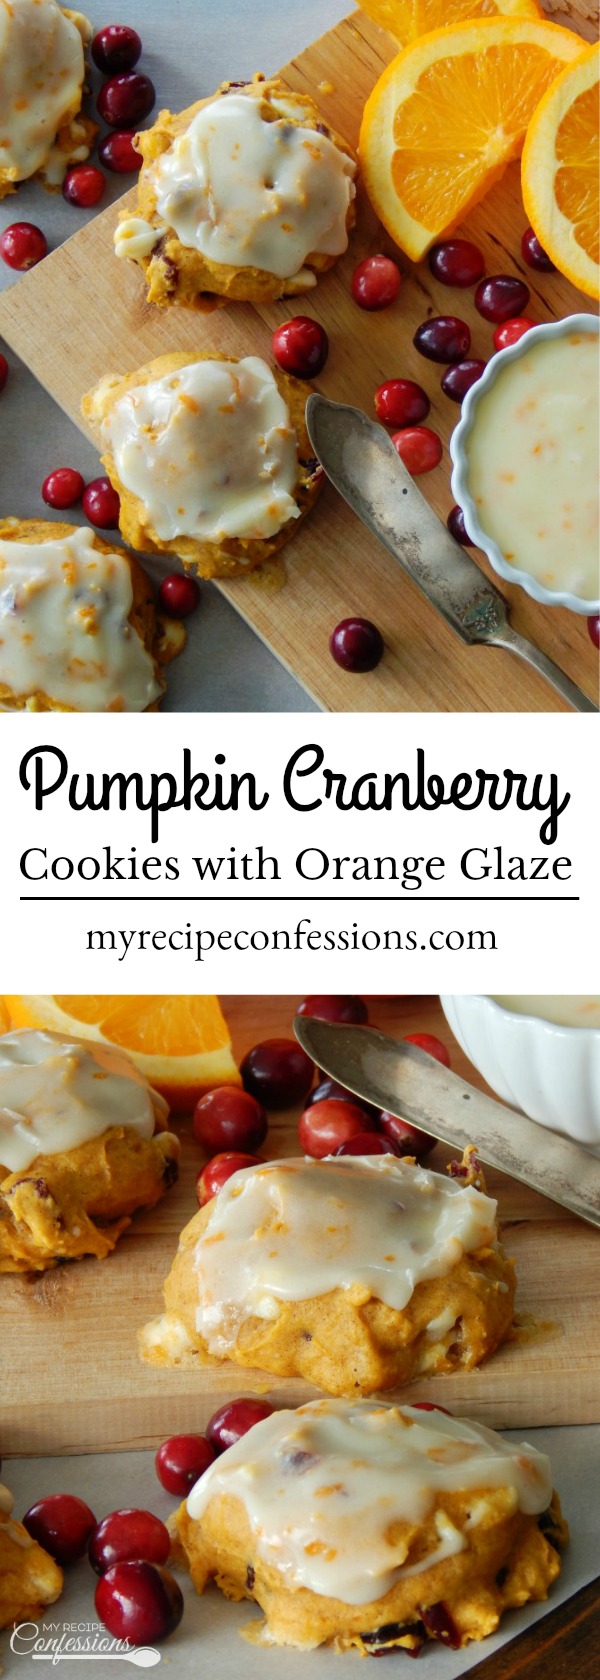 Pumpkin Cranberry Cookies with Orange Glaze are all the best holiday flavors combined into one amazing cookie! This cookie has all the delicious fall flavors we all love ! This is my new favorite holiday cookie recipe!